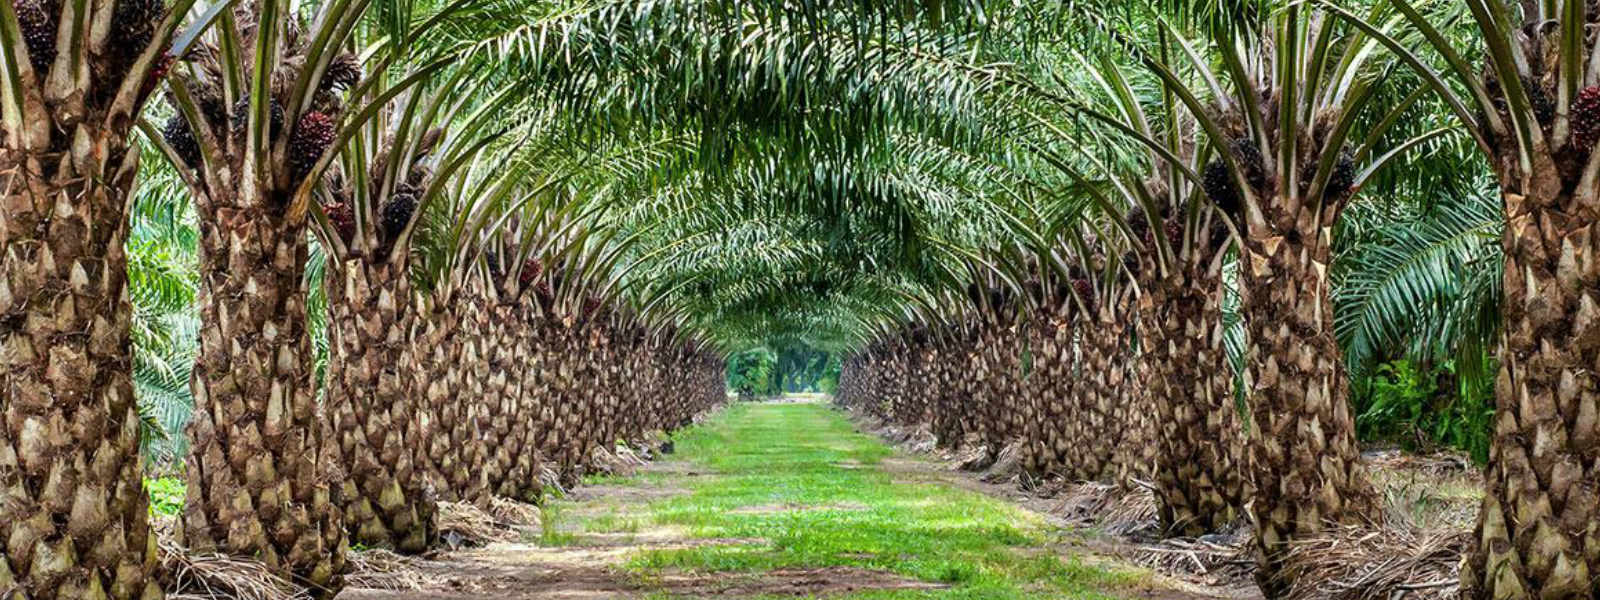 Government to ban oil palm cultivations